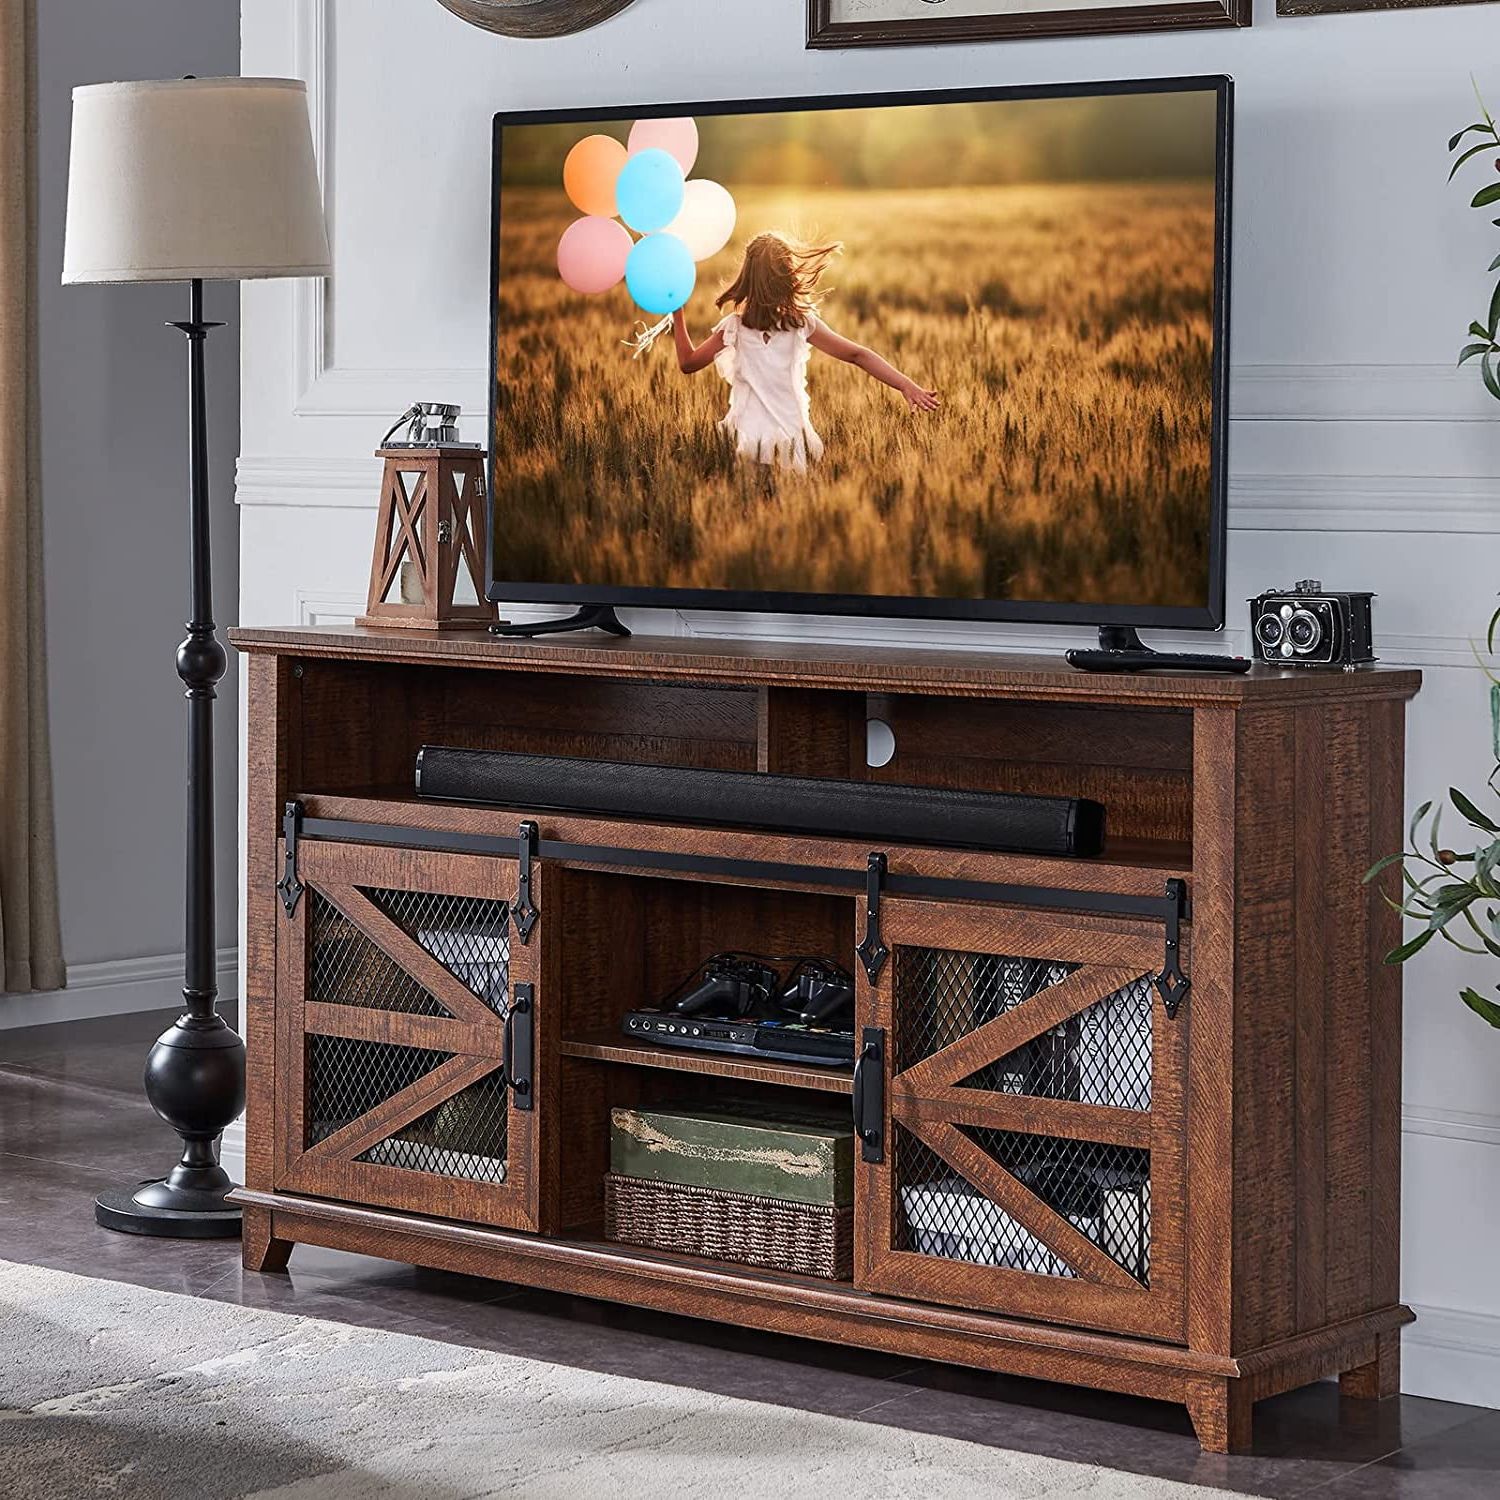 Okd Farmhouse Tv Stand For 65+ Inch Tv, Industrial Media Entertainment  Center, Reclaimed Barnwood – Walmart Intended For Farmhouse Media Entertainment Centers (View 10 of 20)